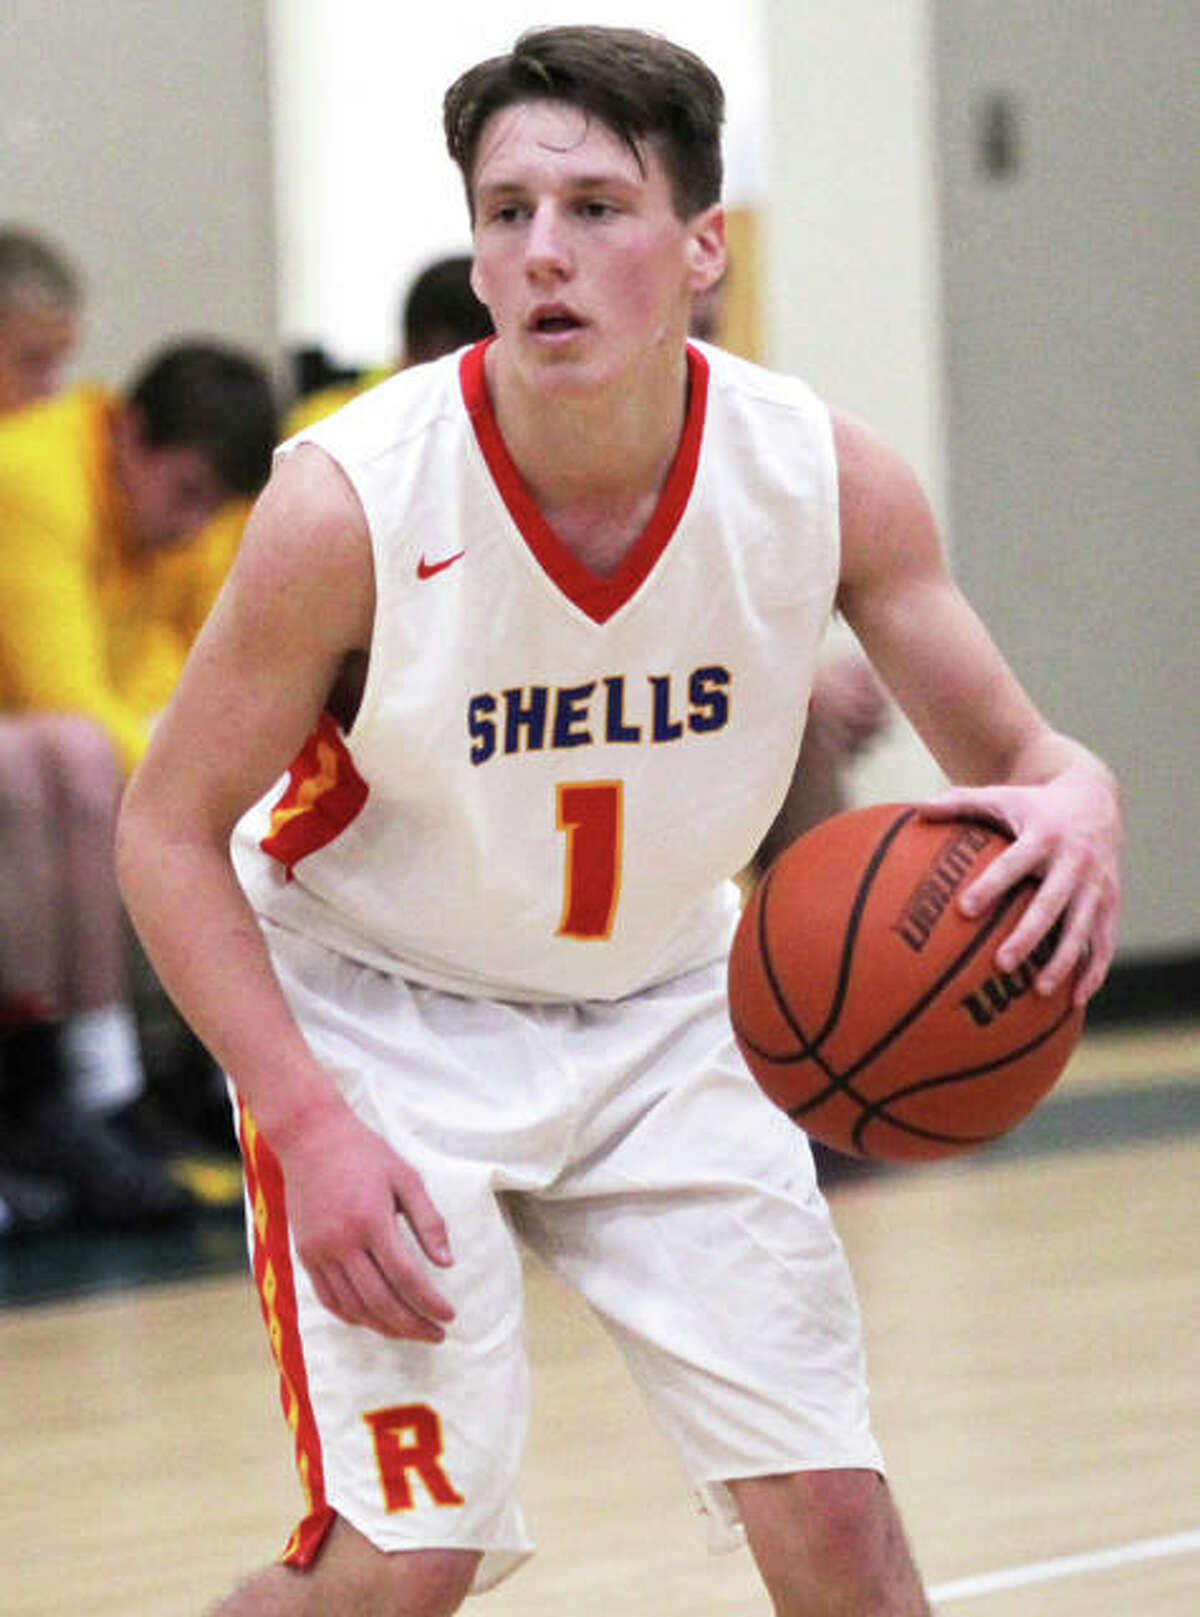 Roxana’s Andrew Beckman scored 22 points Friday night to lead the Shells to a victory over the Carrollton Hawks at Milazzo Gym in Roxana. The Shells are 4-2.